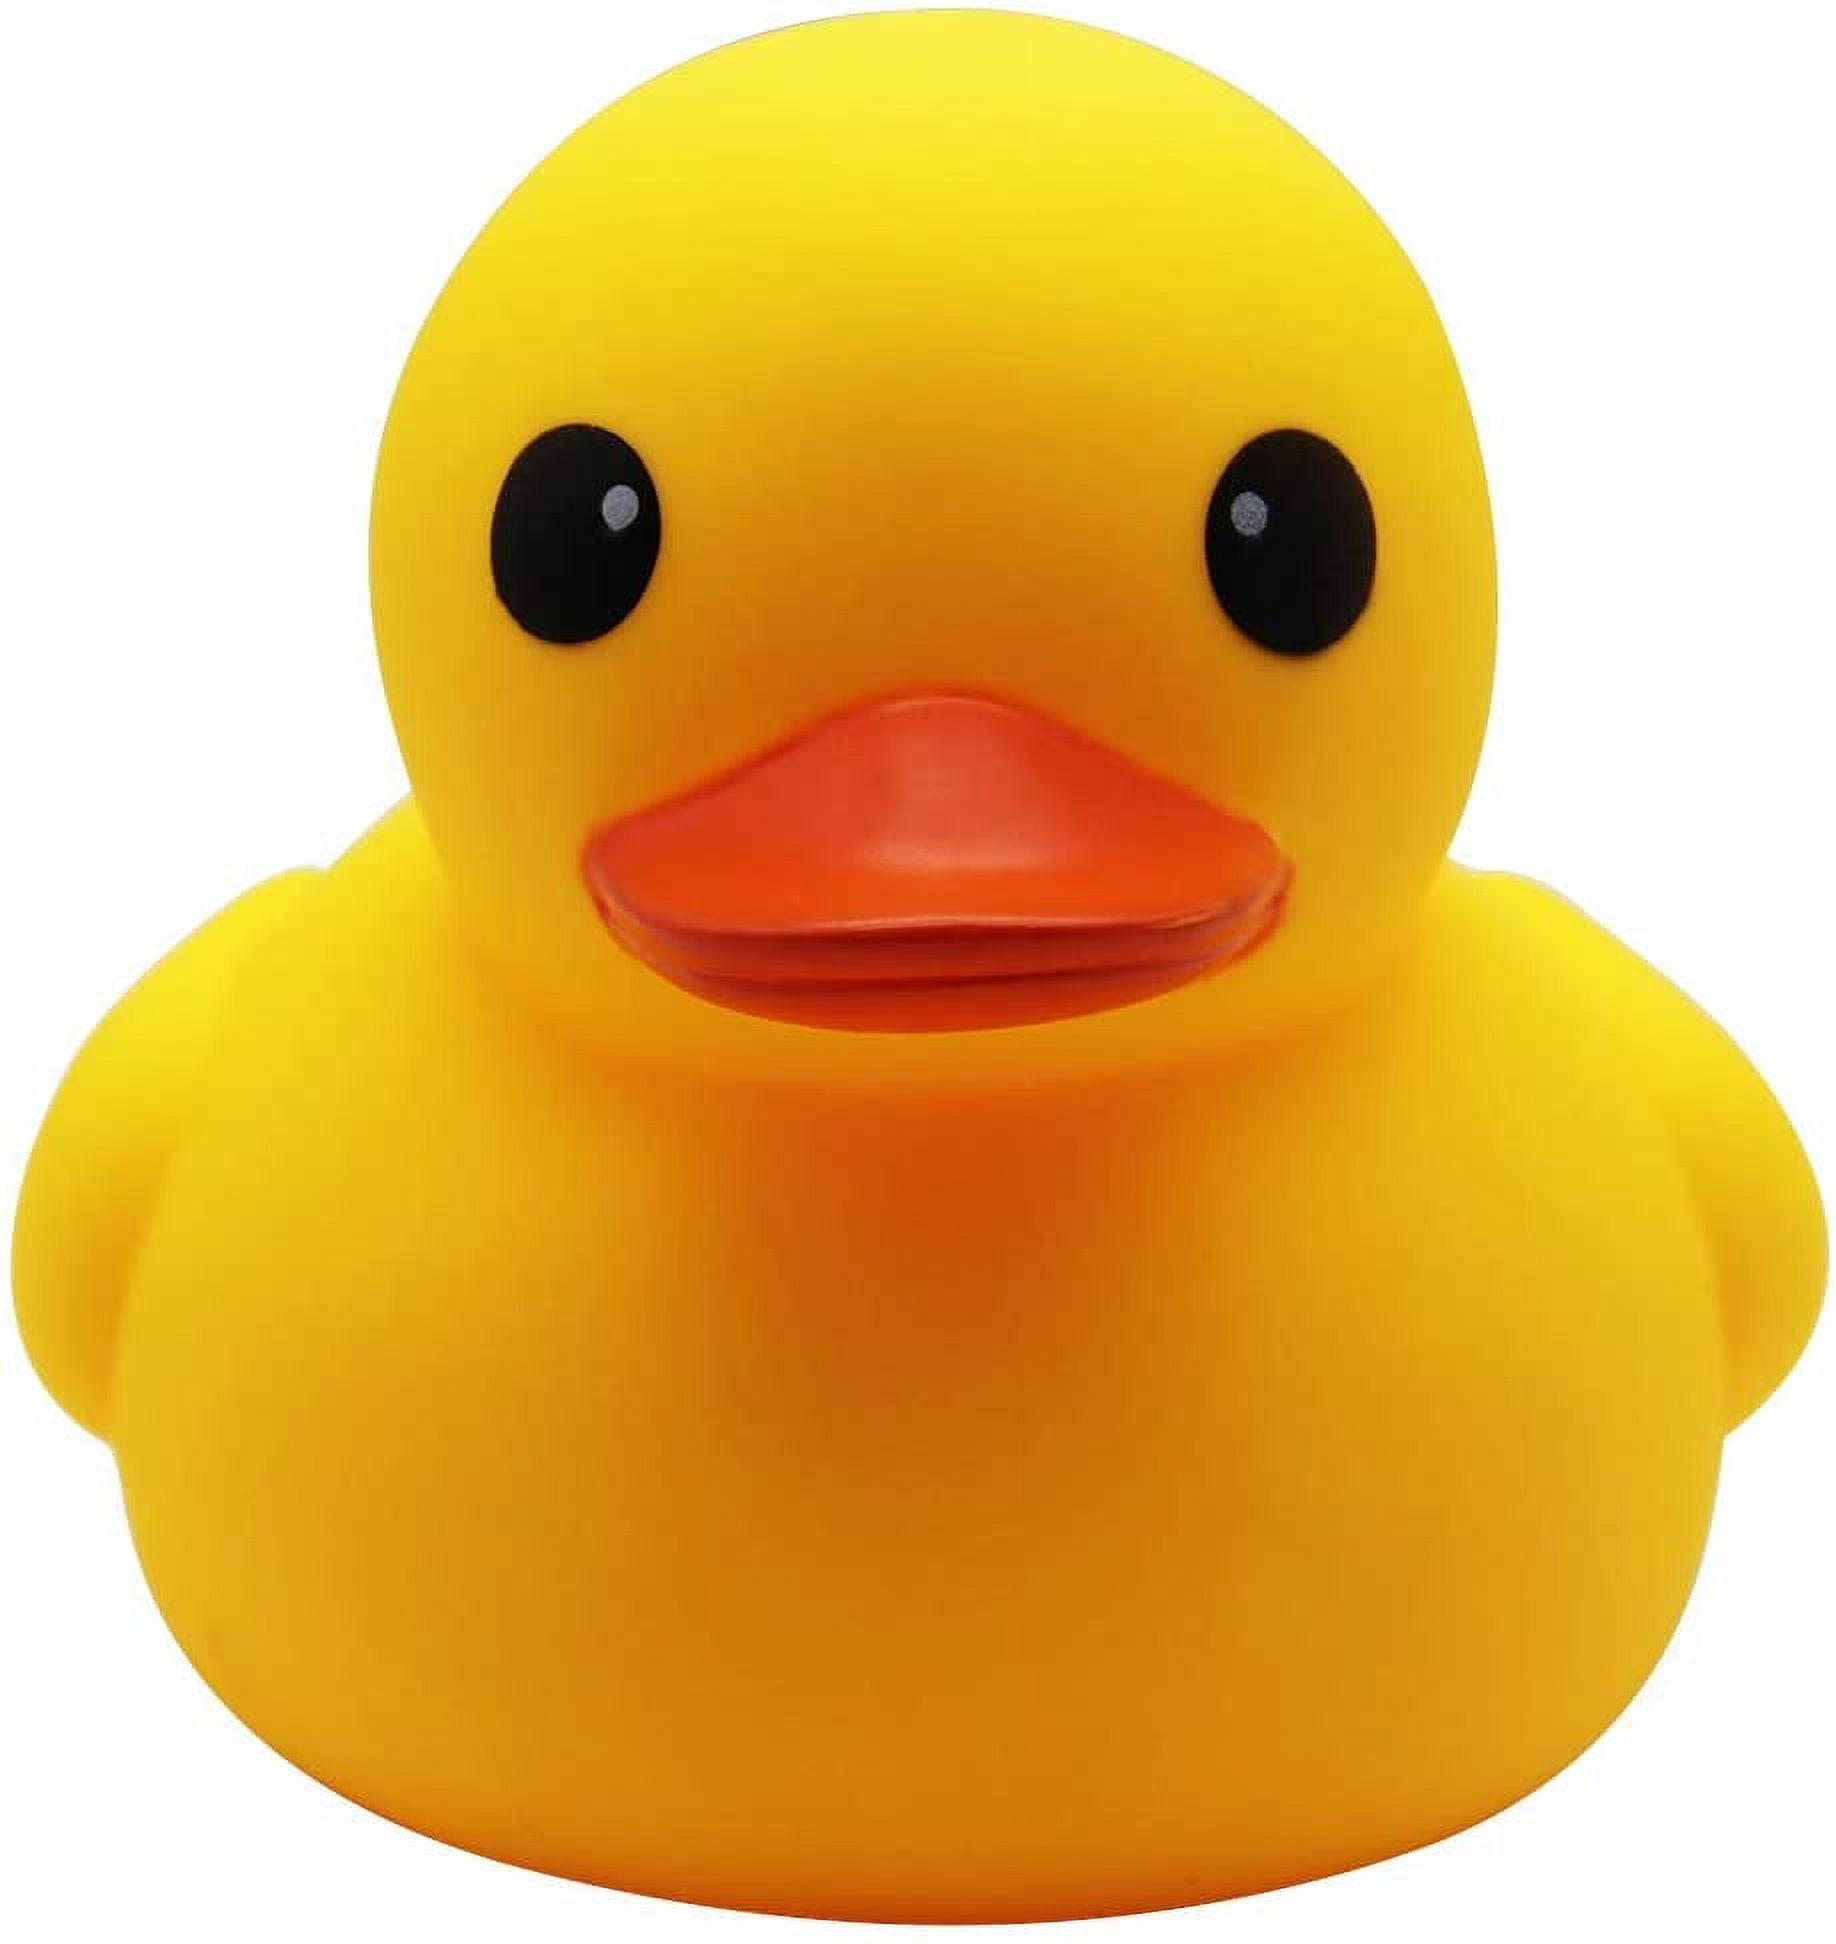 Rubber Ducky Toy - 3 Inch